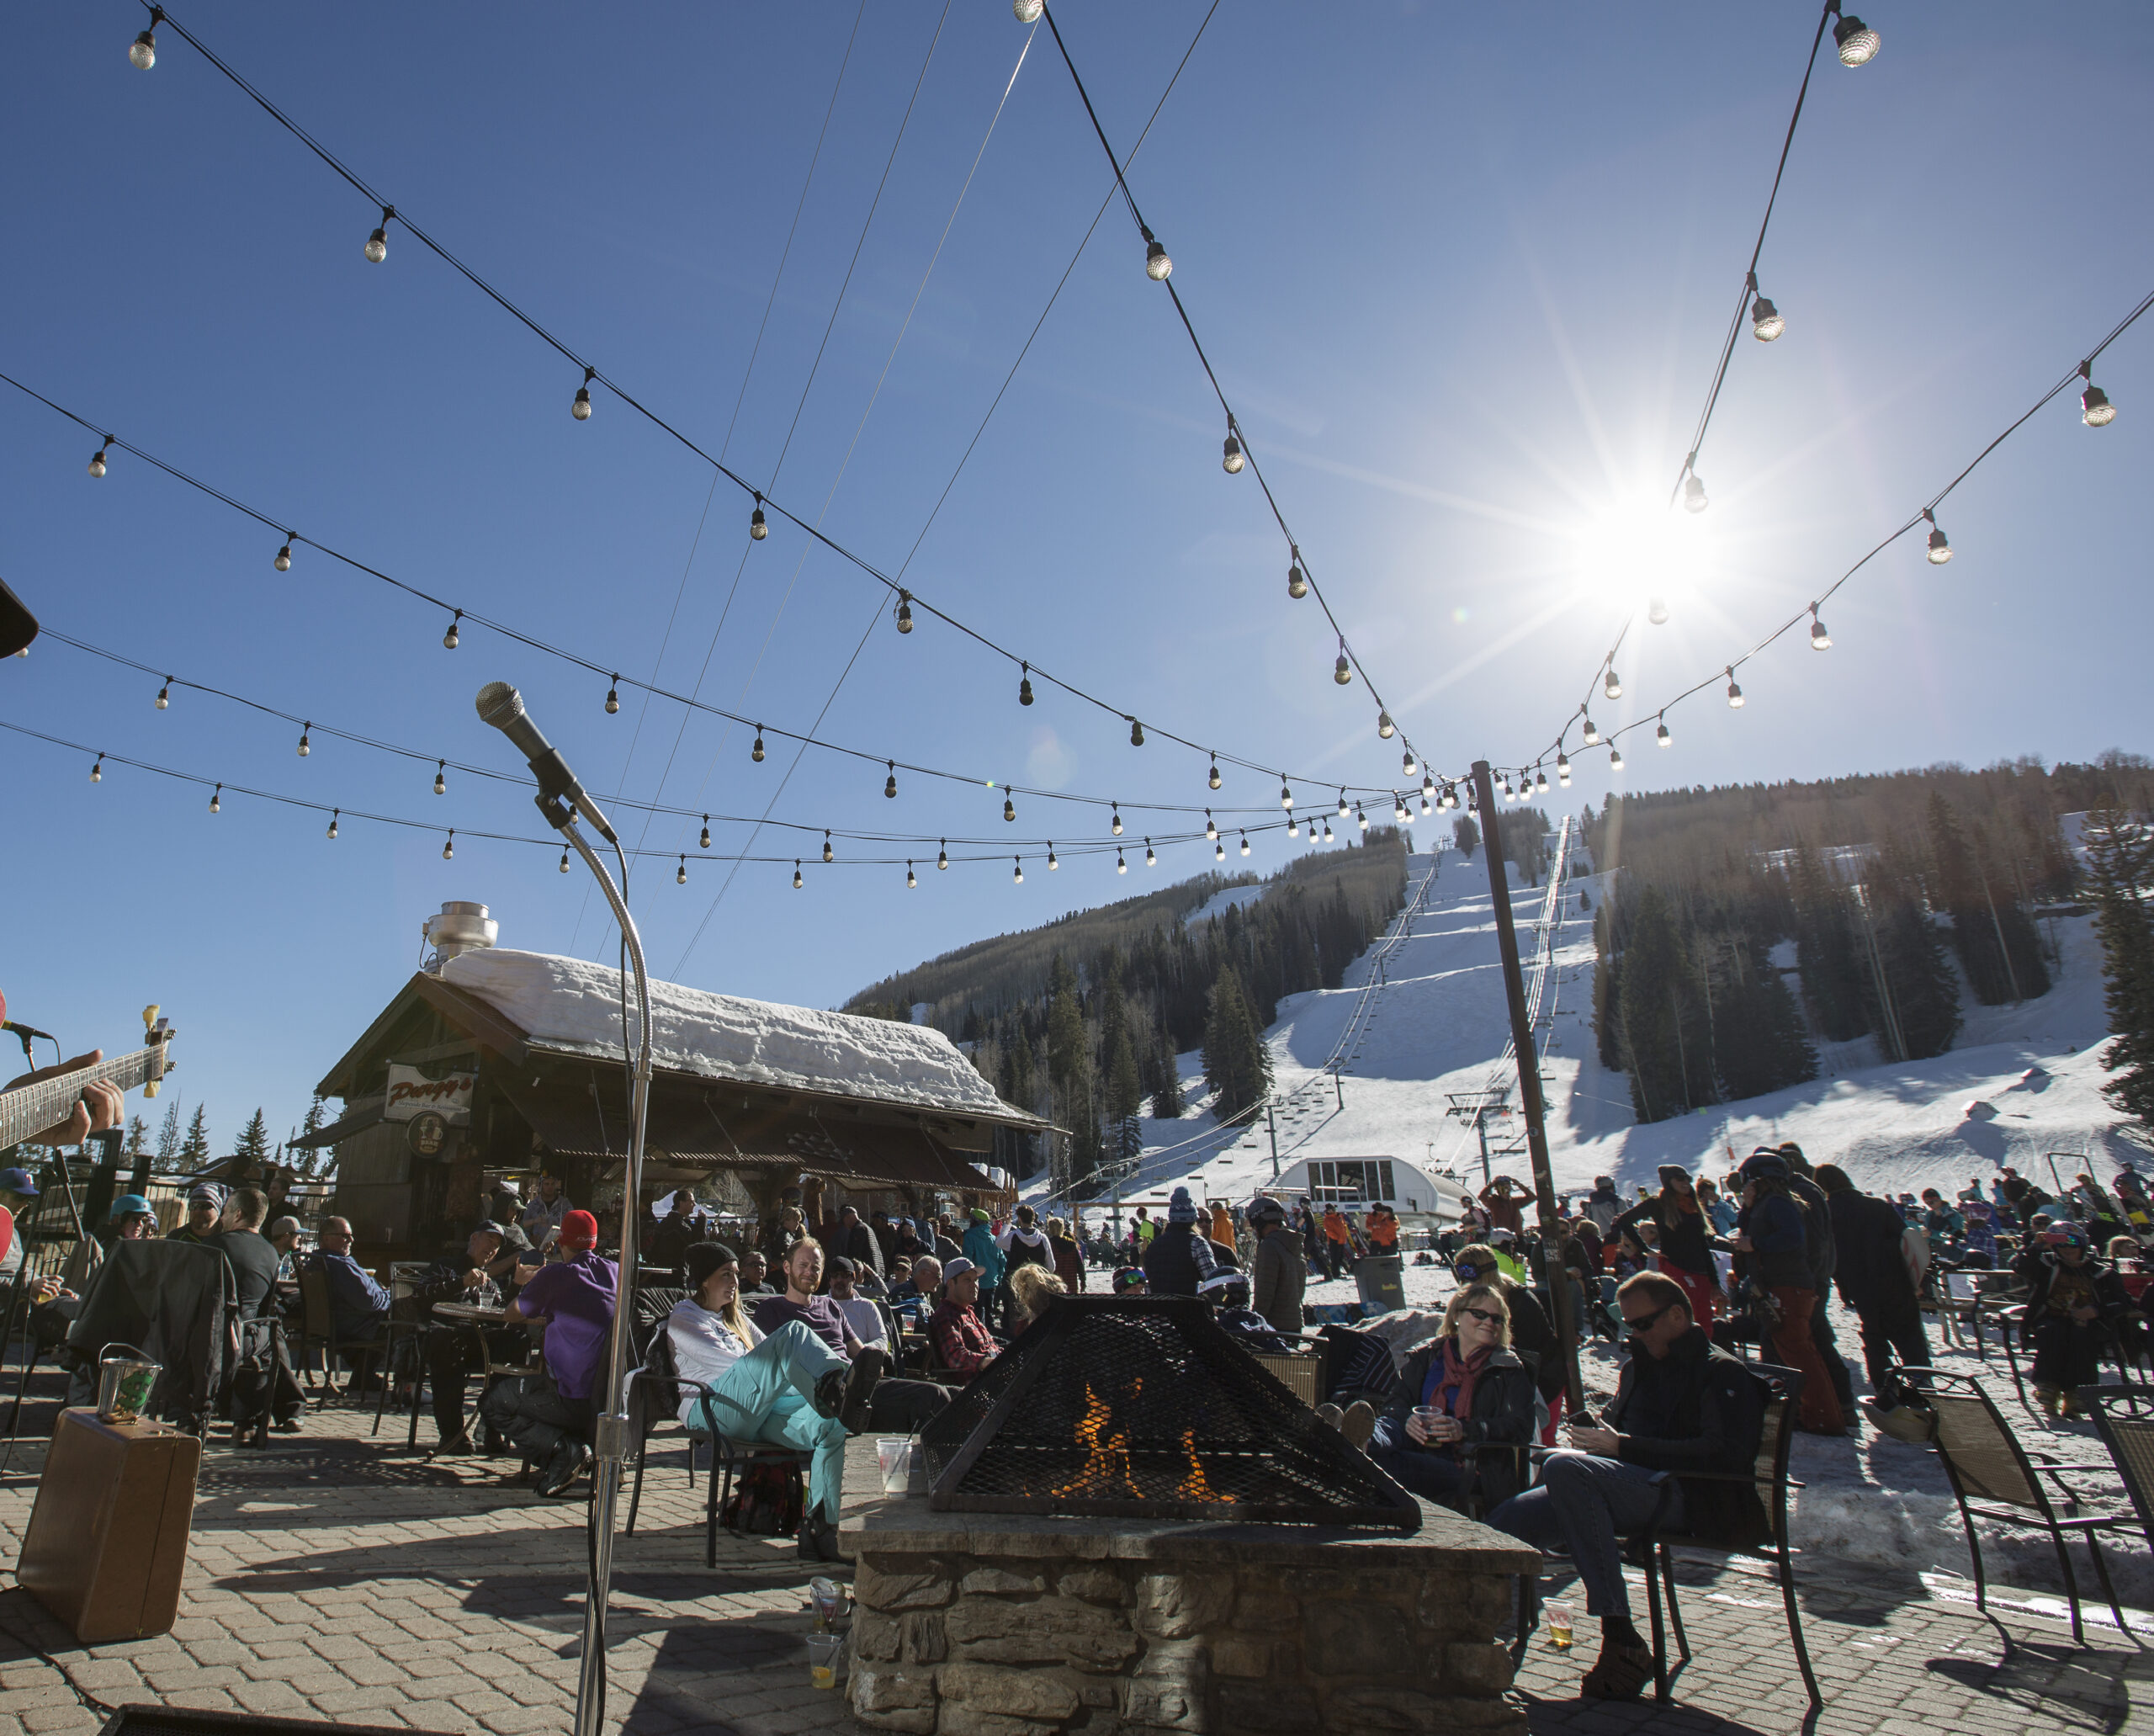 The sun shines over Purgy's Patio with snowy slopes in the background